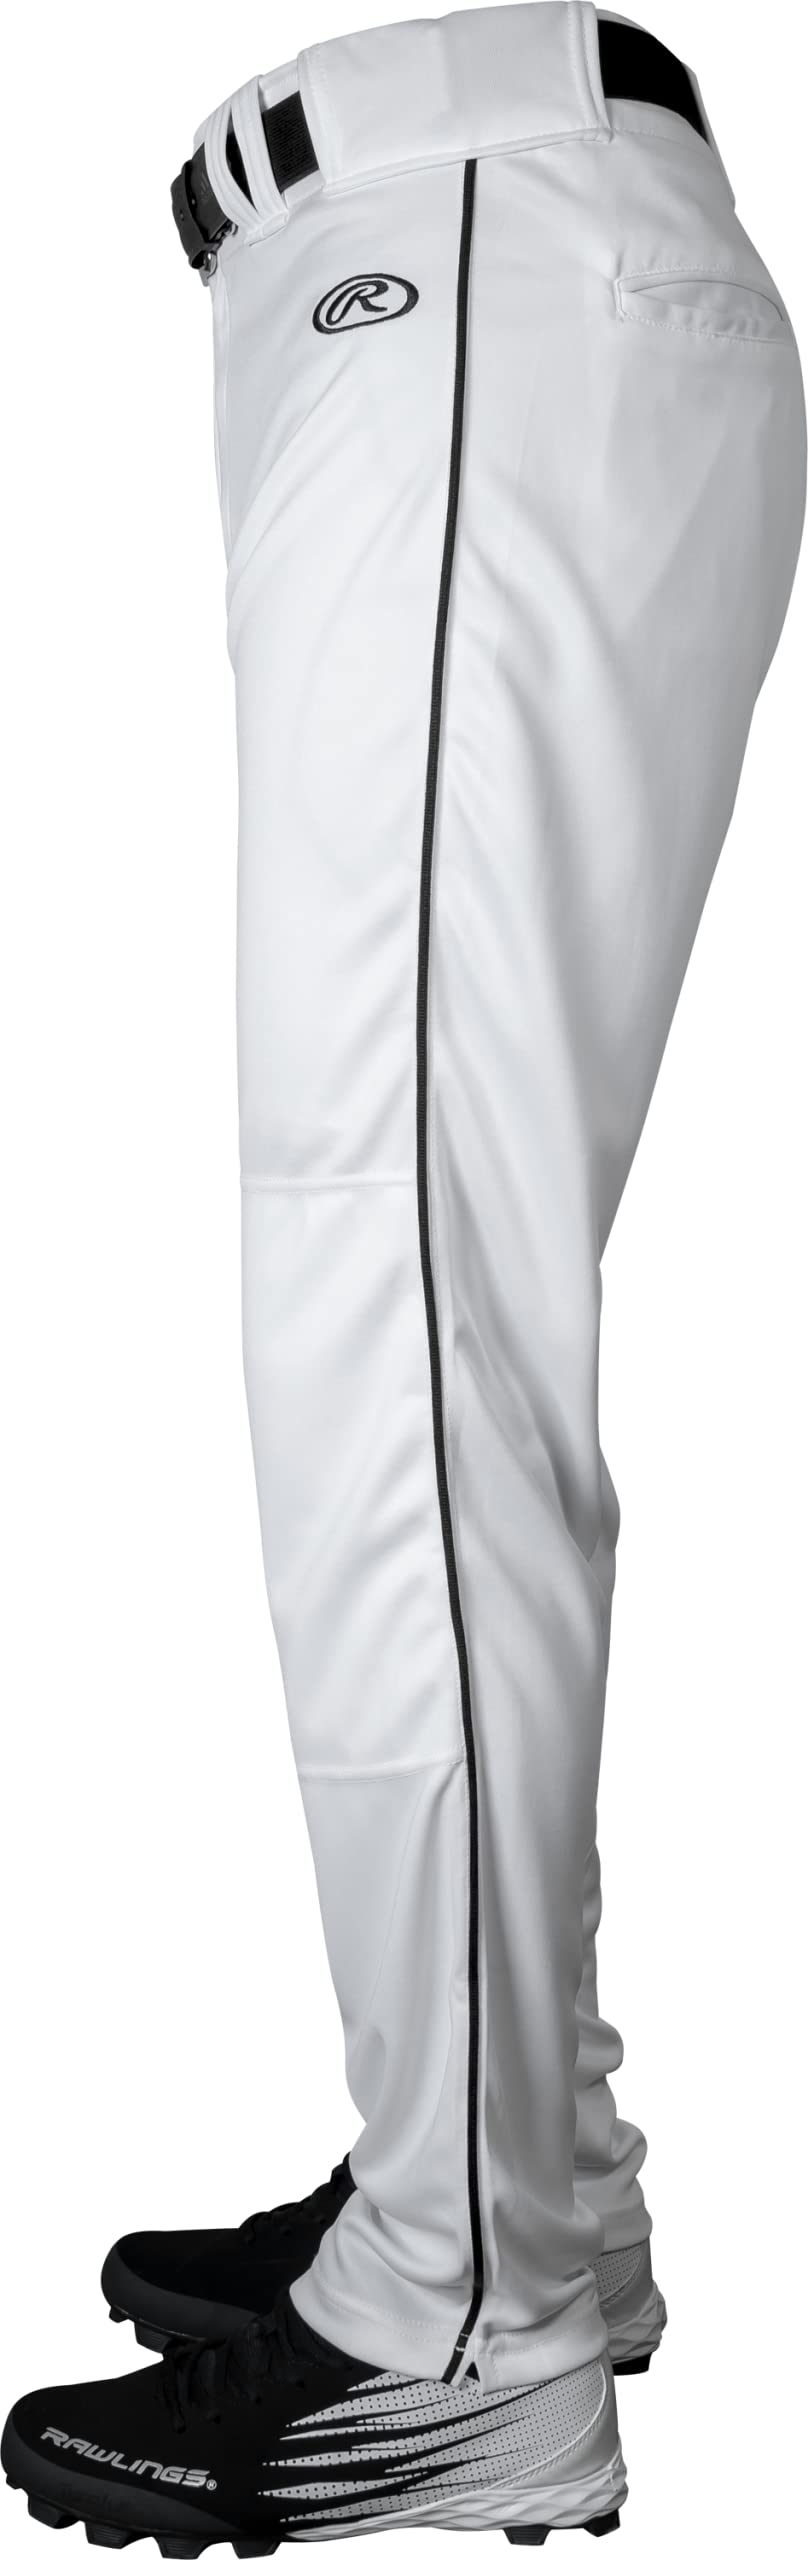 Rawlings Semi-Relaxed Full Length Baseball Pant | Solid & Piped Options | Adult Sizes | Multiple Colors